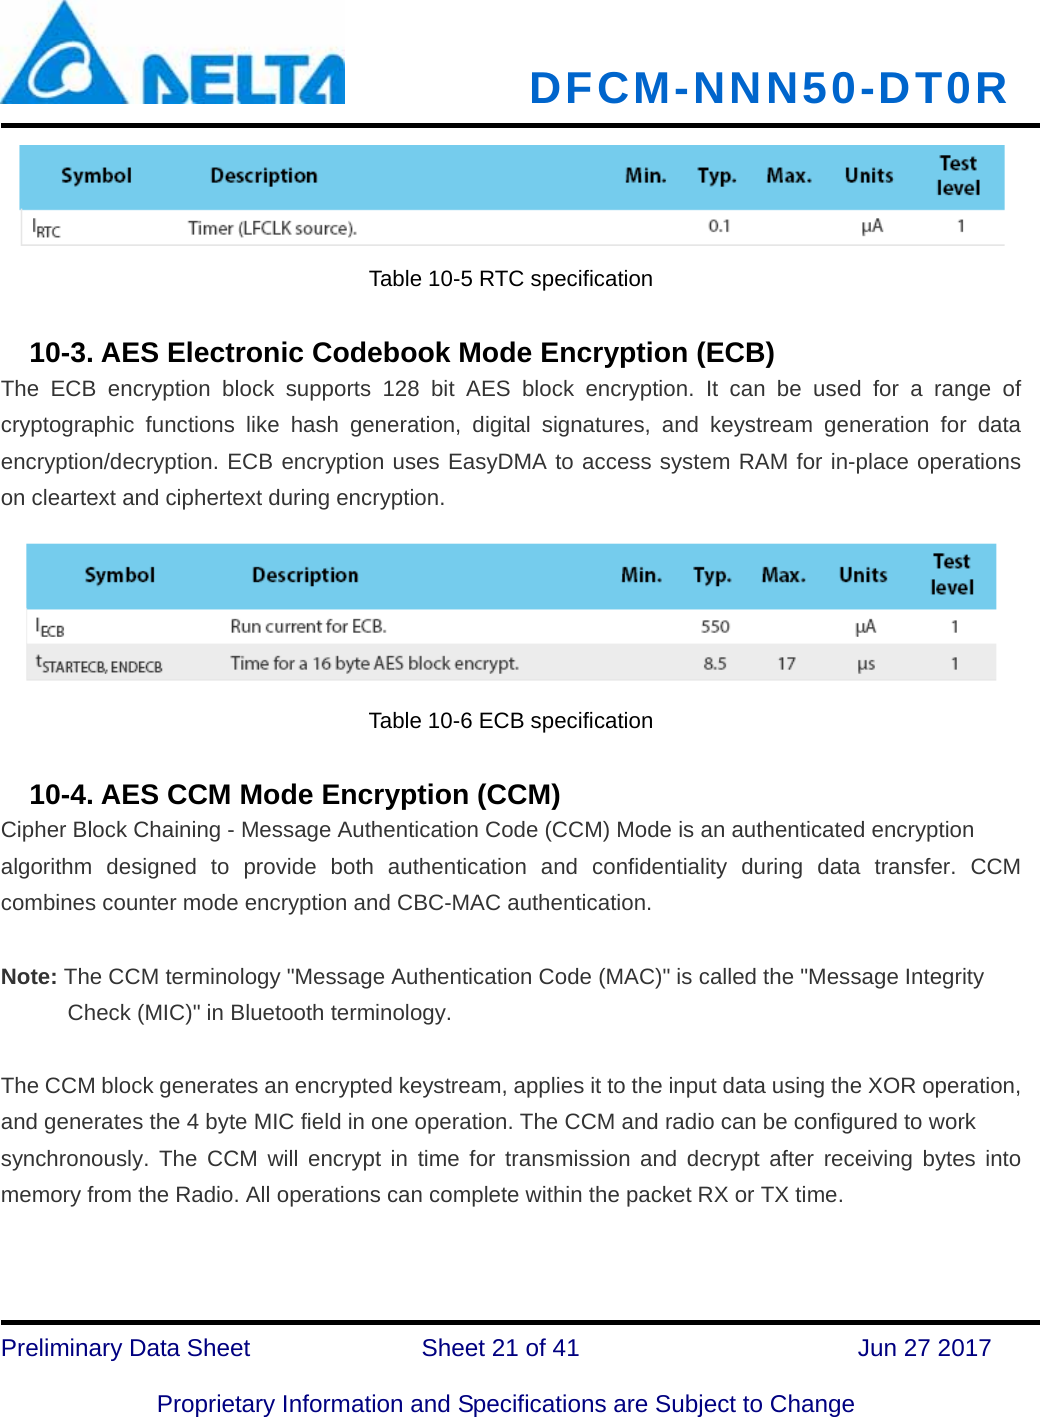   DFCM-NNN50-DT0R   Preliminary Data Sheet              Sheet 21 of 41      Jun 27 2017  Proprietary Information and Specifications are Subject to Change Table 10-5 RTC specification     10-3. AES Electronic Codebook Mode Encryption (ECB) The ECB encryption block supports 128 bit AES block encryption. It can be used for a range of cryptographic functions like hash generation, digital signatures, and keystream generation for data encryption/decryption. ECB encryption uses EasyDMA to access system RAM for in-place operations on cleartext and ciphertext during encryption. Table 10-6 ECB specification     10-4. AES CCM Mode Encryption (CCM) Cipher Block Chaining - Message Authentication Code (CCM) Mode is an authenticated encryption algorithm designed to provide both authentication and confidentiality during data transfer. CCM combines counter mode encryption and CBC-MAC authentication.  Note: The CCM terminology &quot;Message Authentication Code (MAC)&quot; is called the &quot;Message Integrity Check (MIC)&quot; in Bluetooth terminology.   The CCM block generates an encrypted keystream, applies it to the input data using the XOR operation, and generates the 4 byte MIC field in one operation. The CCM and radio can be configured to work synchronously. The CCM will encrypt in time for transmission and decrypt after receiving bytes into memory from the Radio. All operations can complete within the packet RX or TX time. 